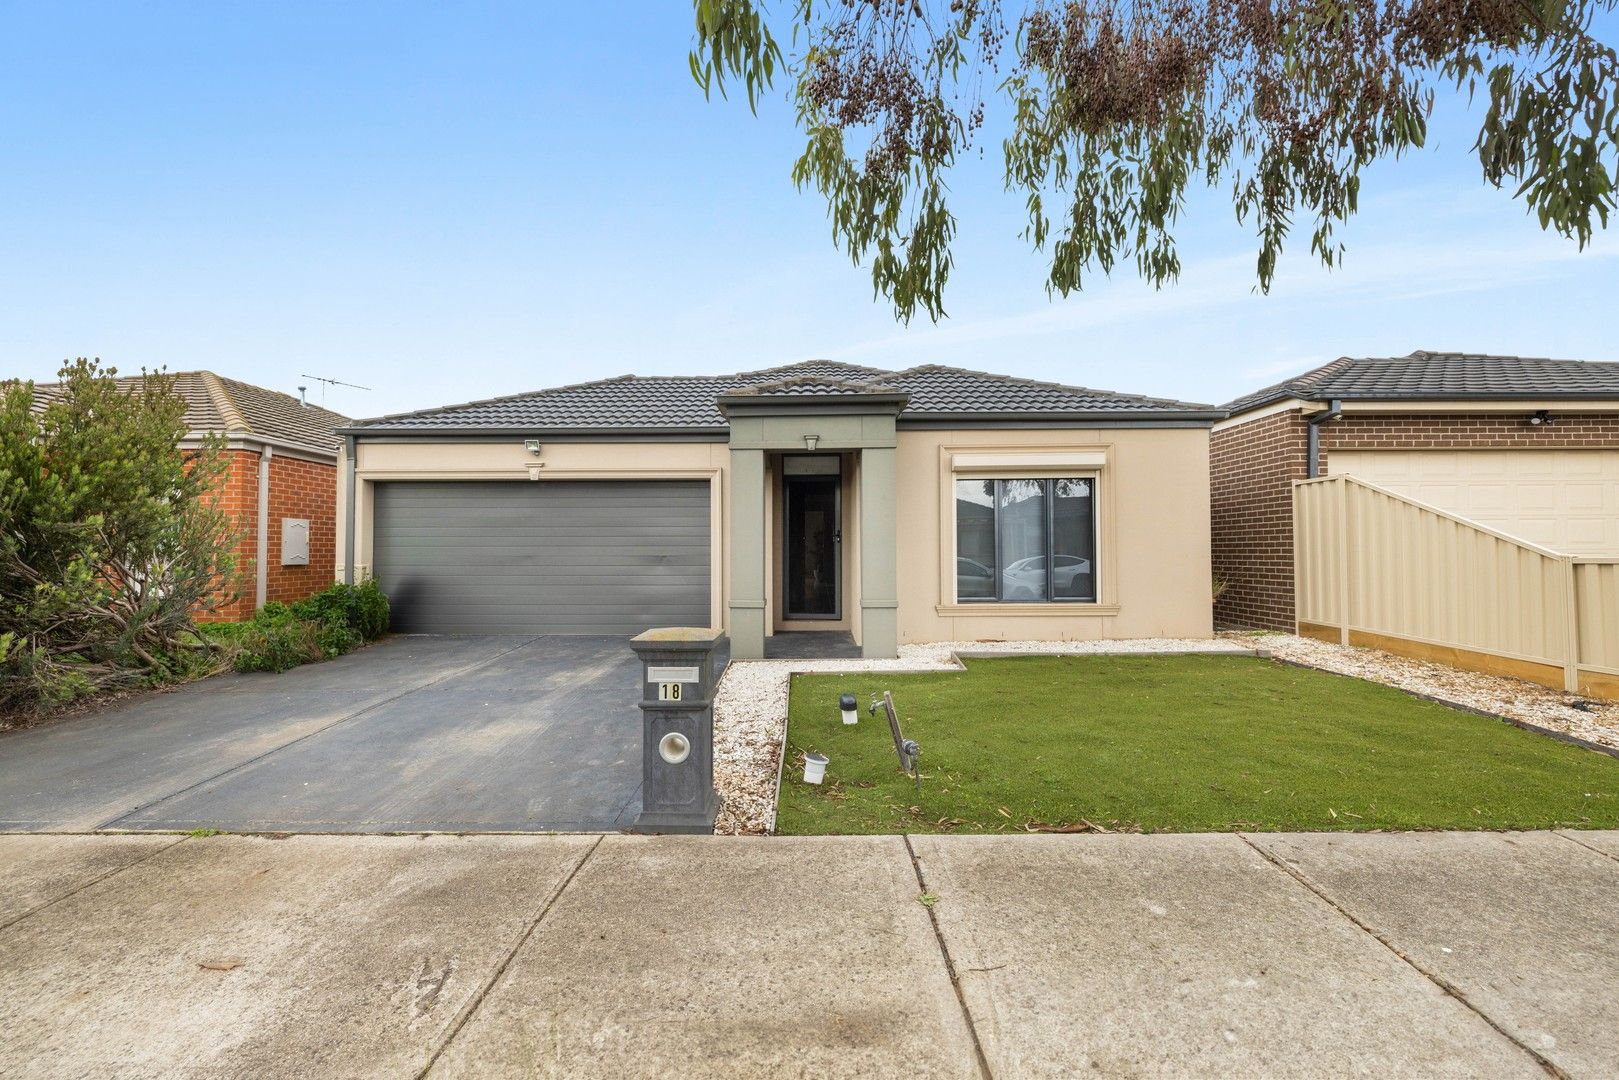 3 bedrooms House in 18 Chettam Street EPPING VIC, 3076